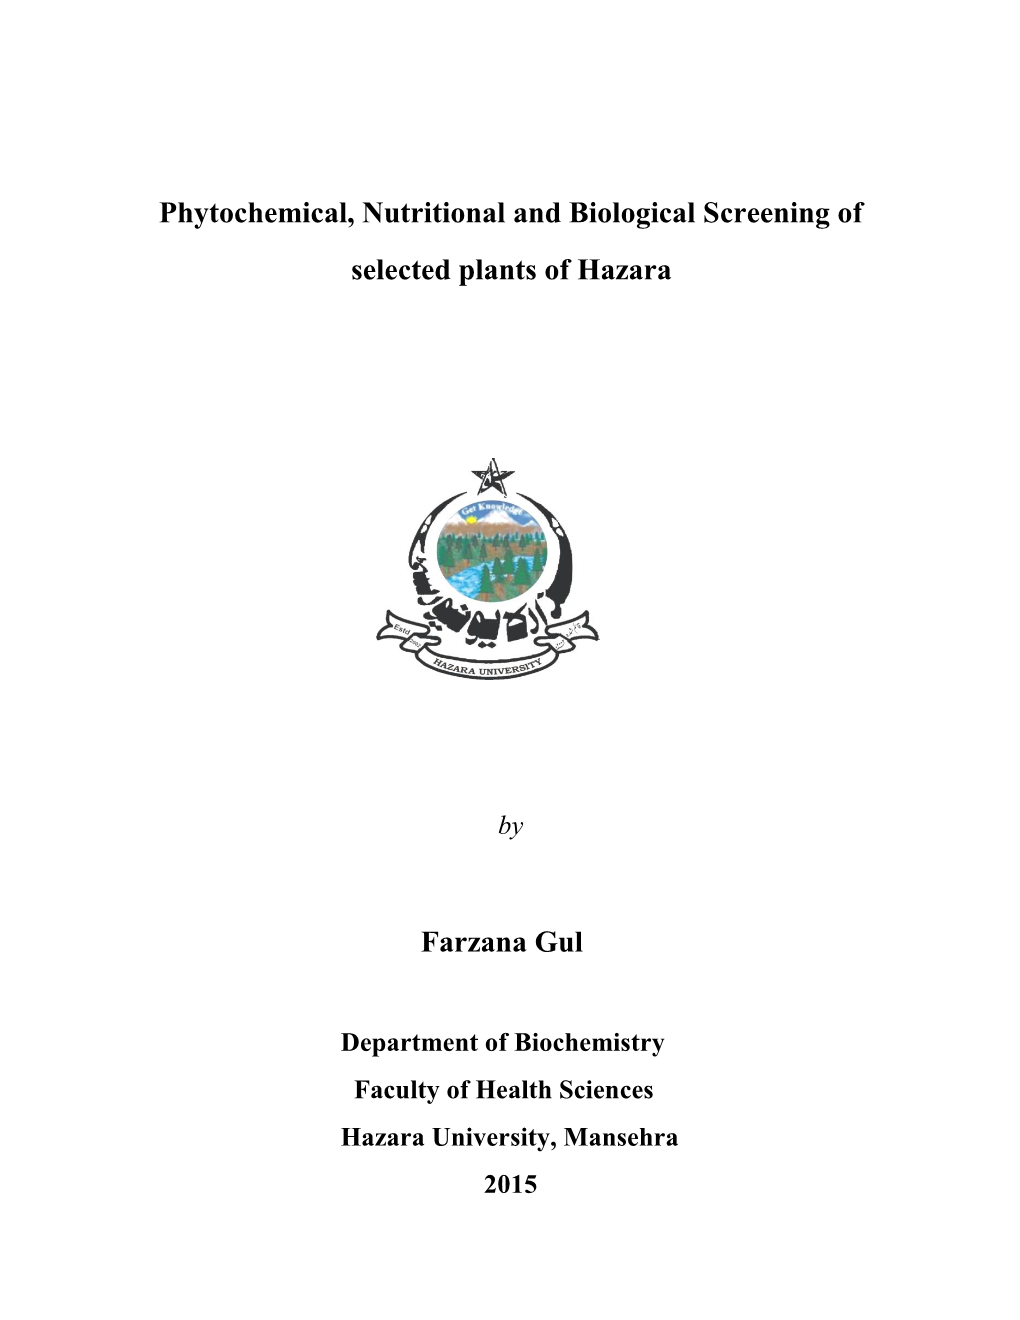 Phytochemical, Nutritional and Biological Screening of Selected Plants of Hazara Farzana